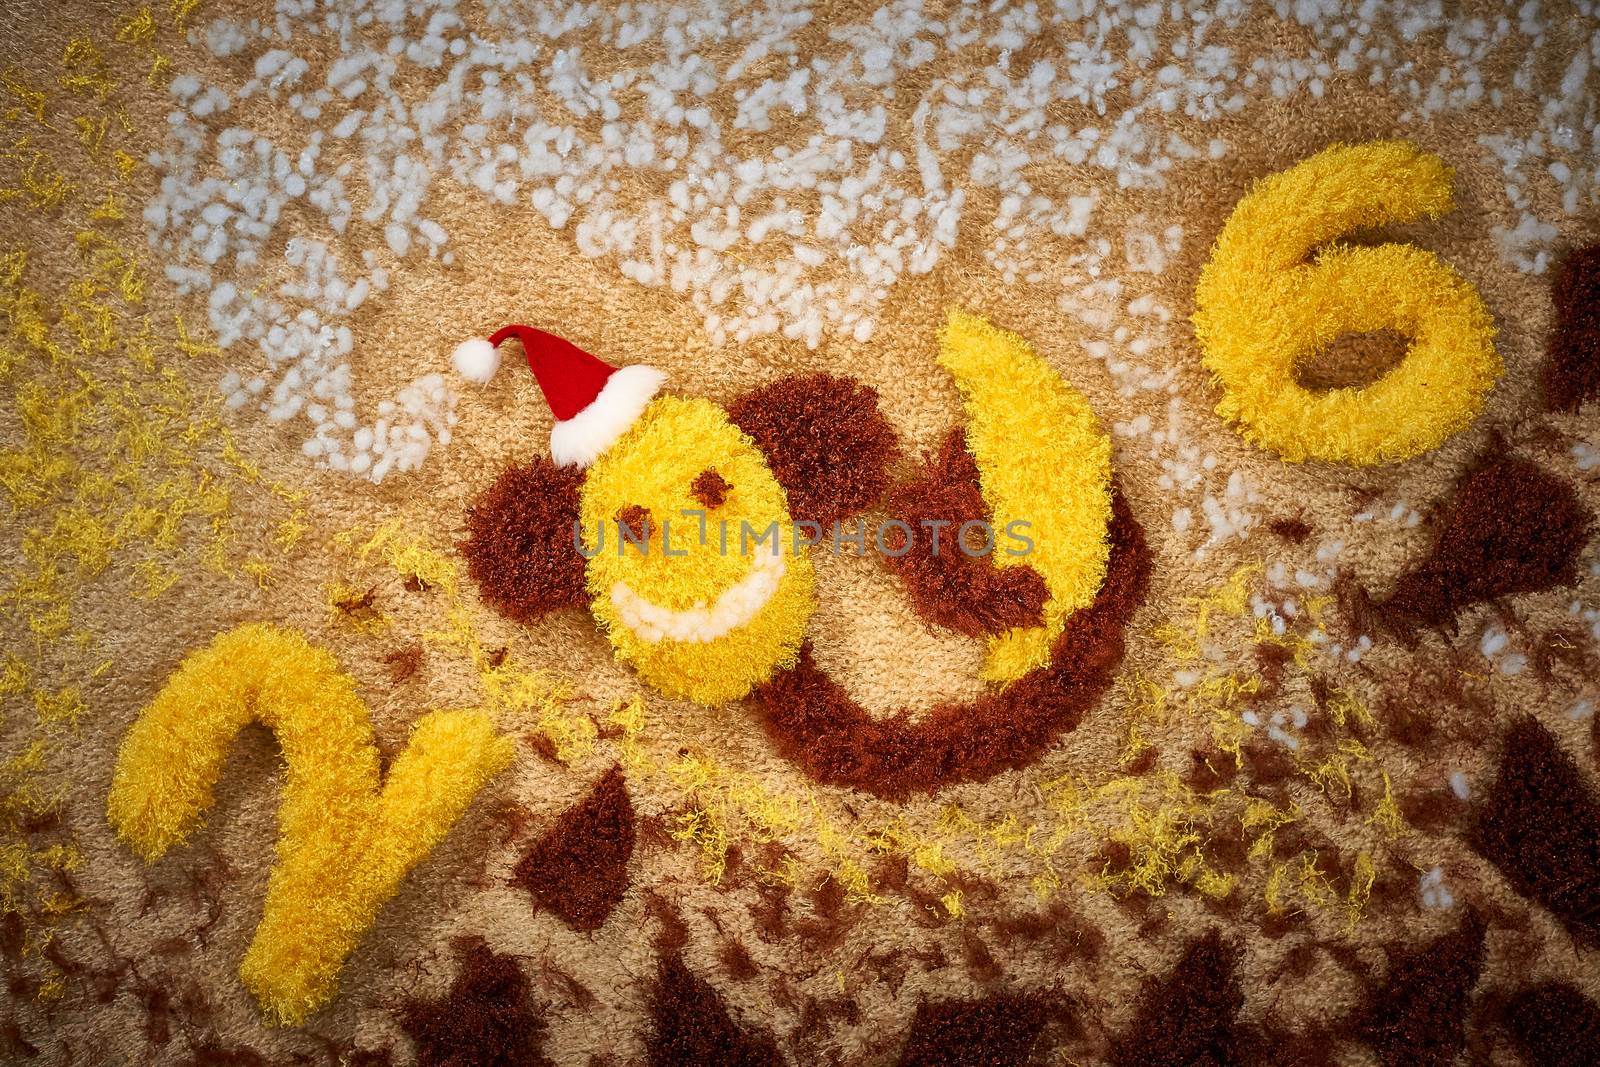 New Year 2016. Christmas.Funny monkey in Santa hat with banana. Happy vivid festive still life. Yellow fabric digits handmade. Playful fluffy party decoration.Shaggy unusual holiday card, copyspace